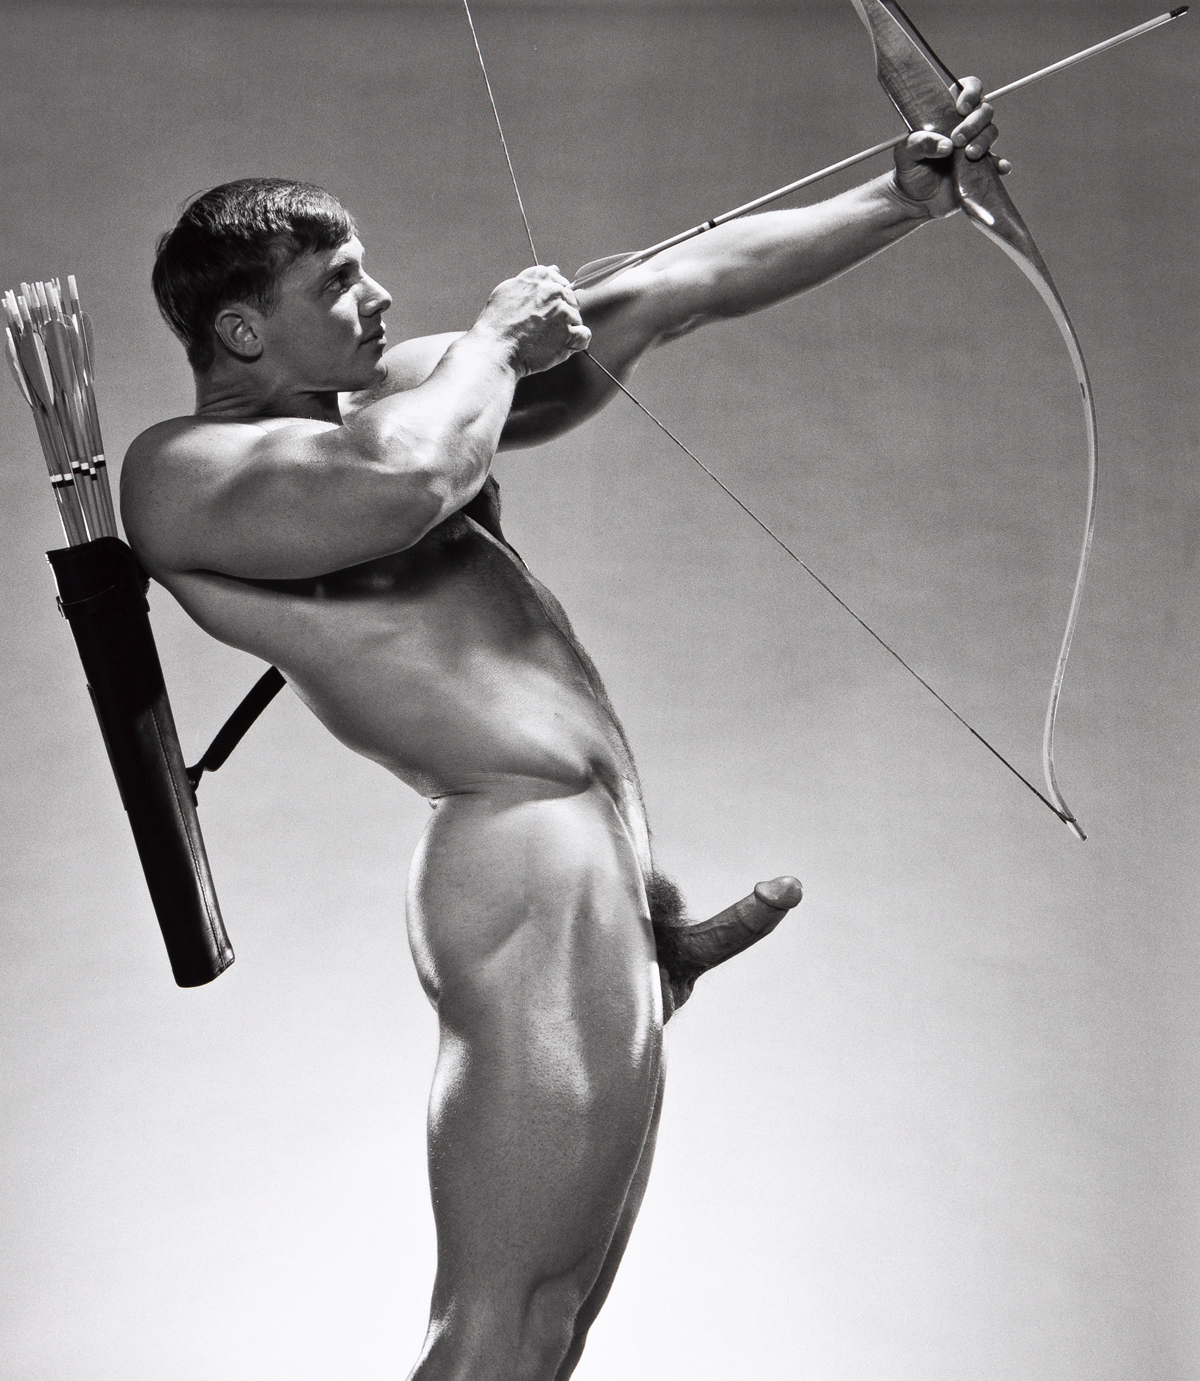 JIM FRENCH (1932-2017) John Pruit, Bow and Arrow.